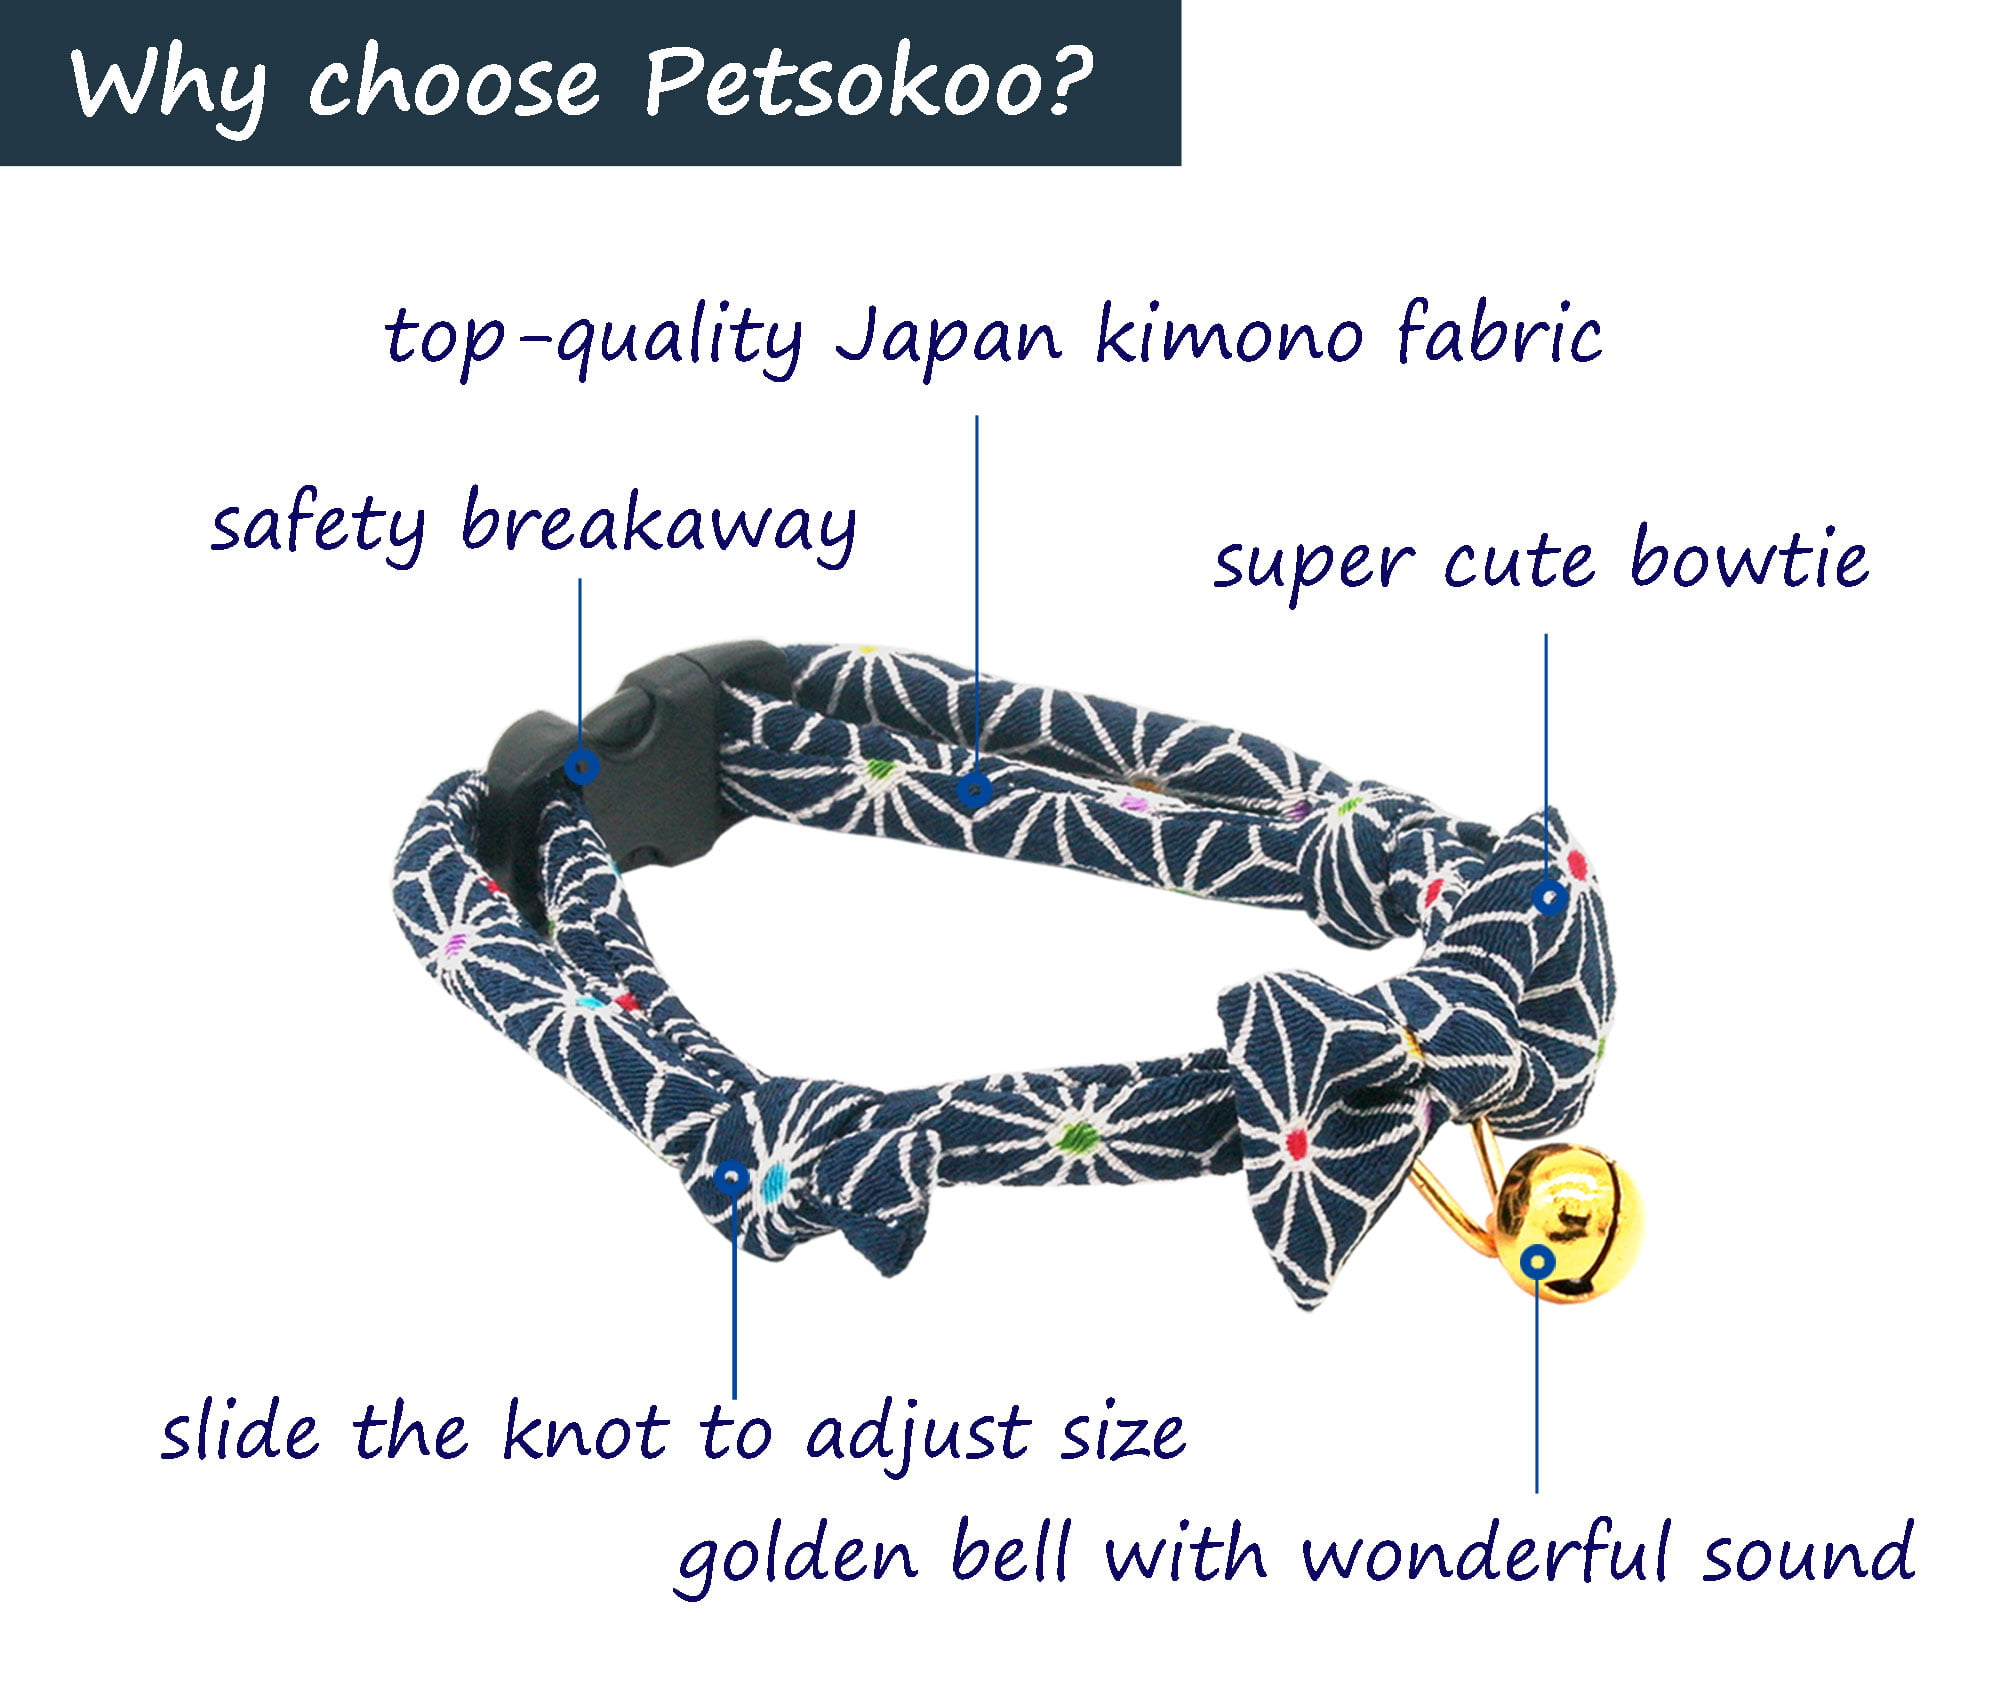 Japan Tortoiseshell Figure Style Safety Quick Breakaway Original Design 6-13 inch,16-32cm , Purple Comfortable Durable Lightweight Standard Safety Quick Breakawayomfortable Durable Lightweight PetSoKoo Bowtie Cat Collar With Bell 